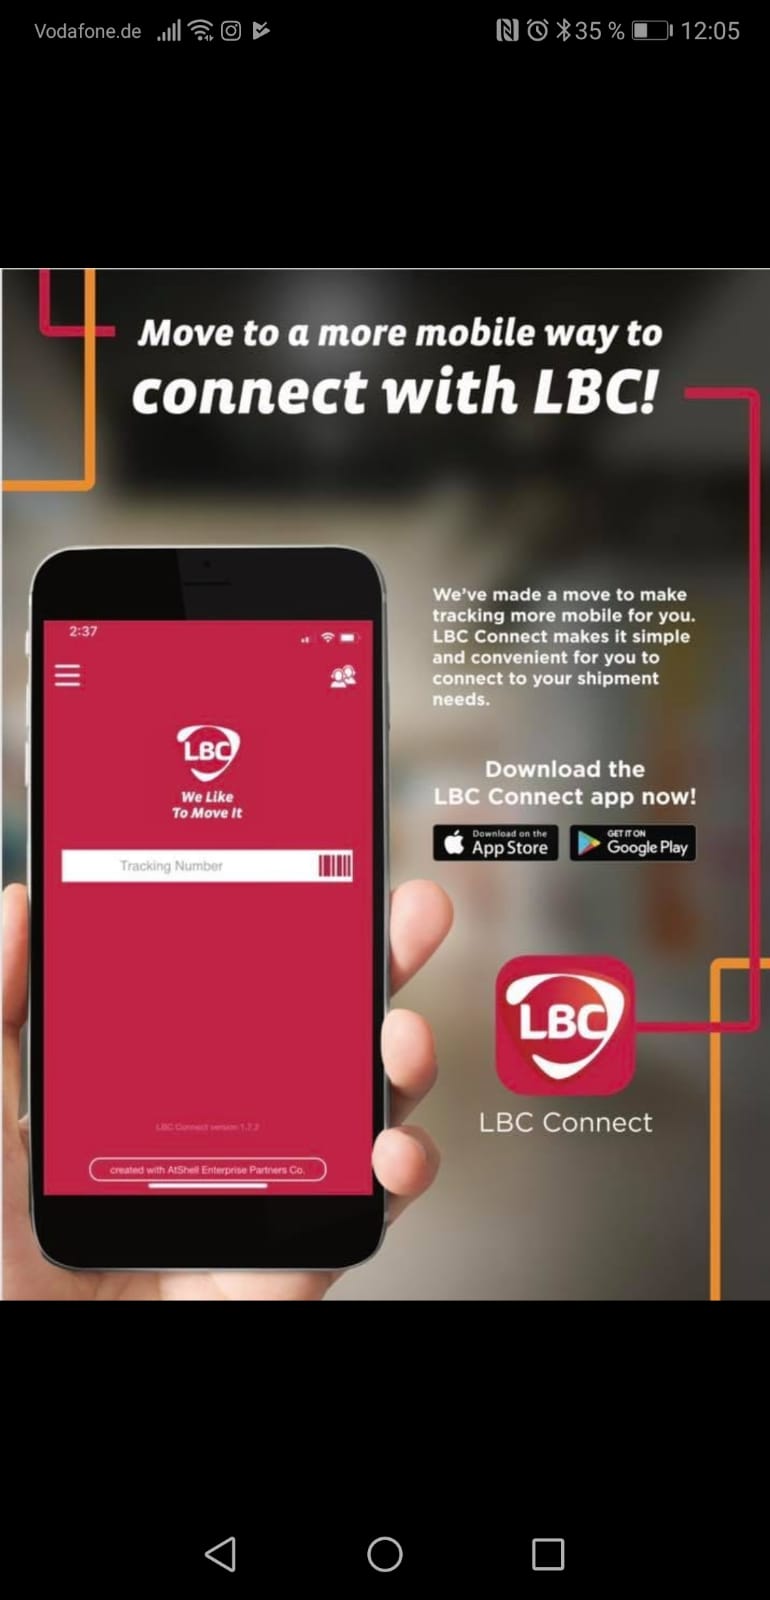 Connect with LBC